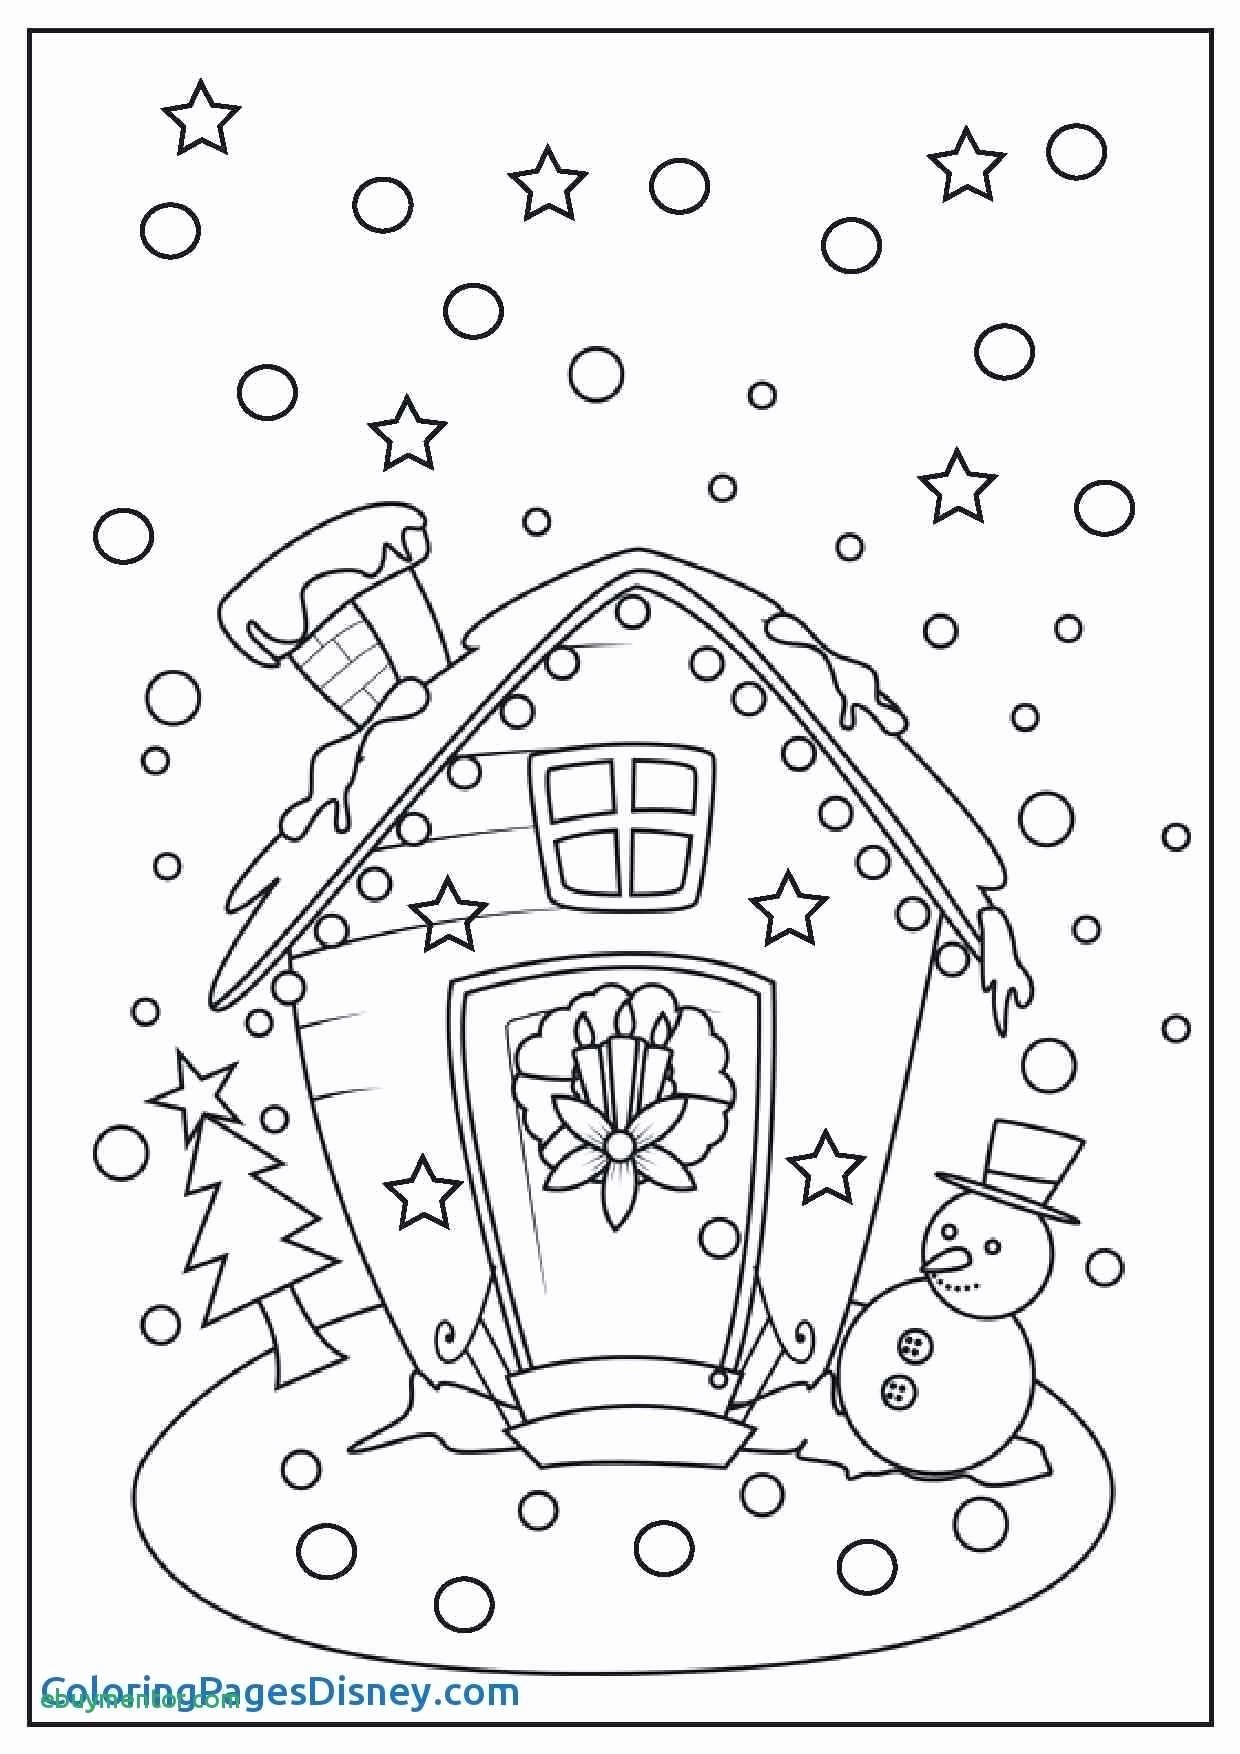 Preschool Turkey Coloring Pages Coloring Ideas Thanksgivingy Coloring Free Pages For Preschoolers